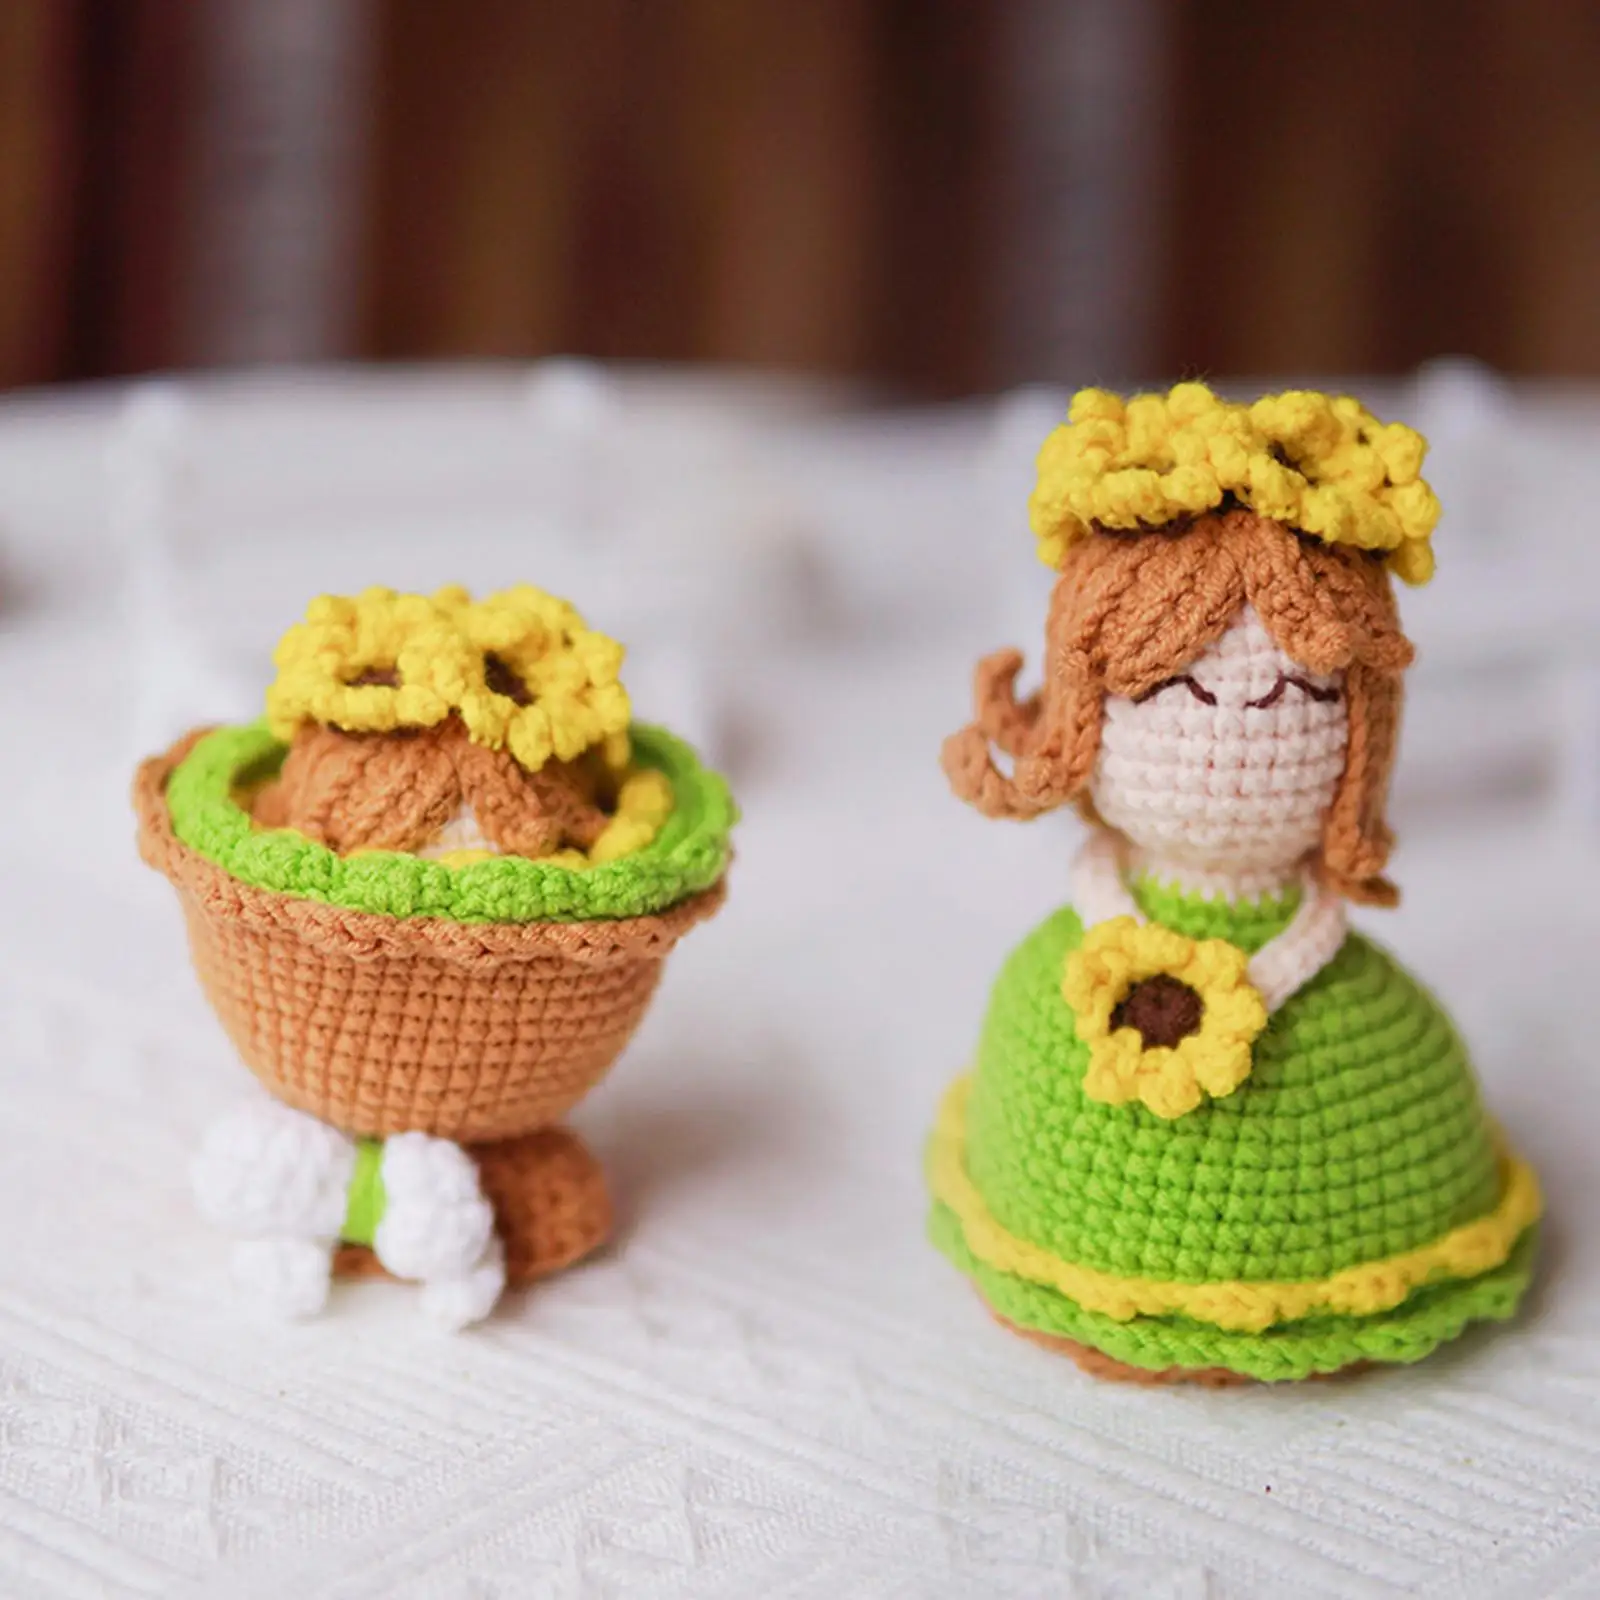 Cute Crochet Stuffed Bride Doll Room Decoration Table Centerpieces for Women